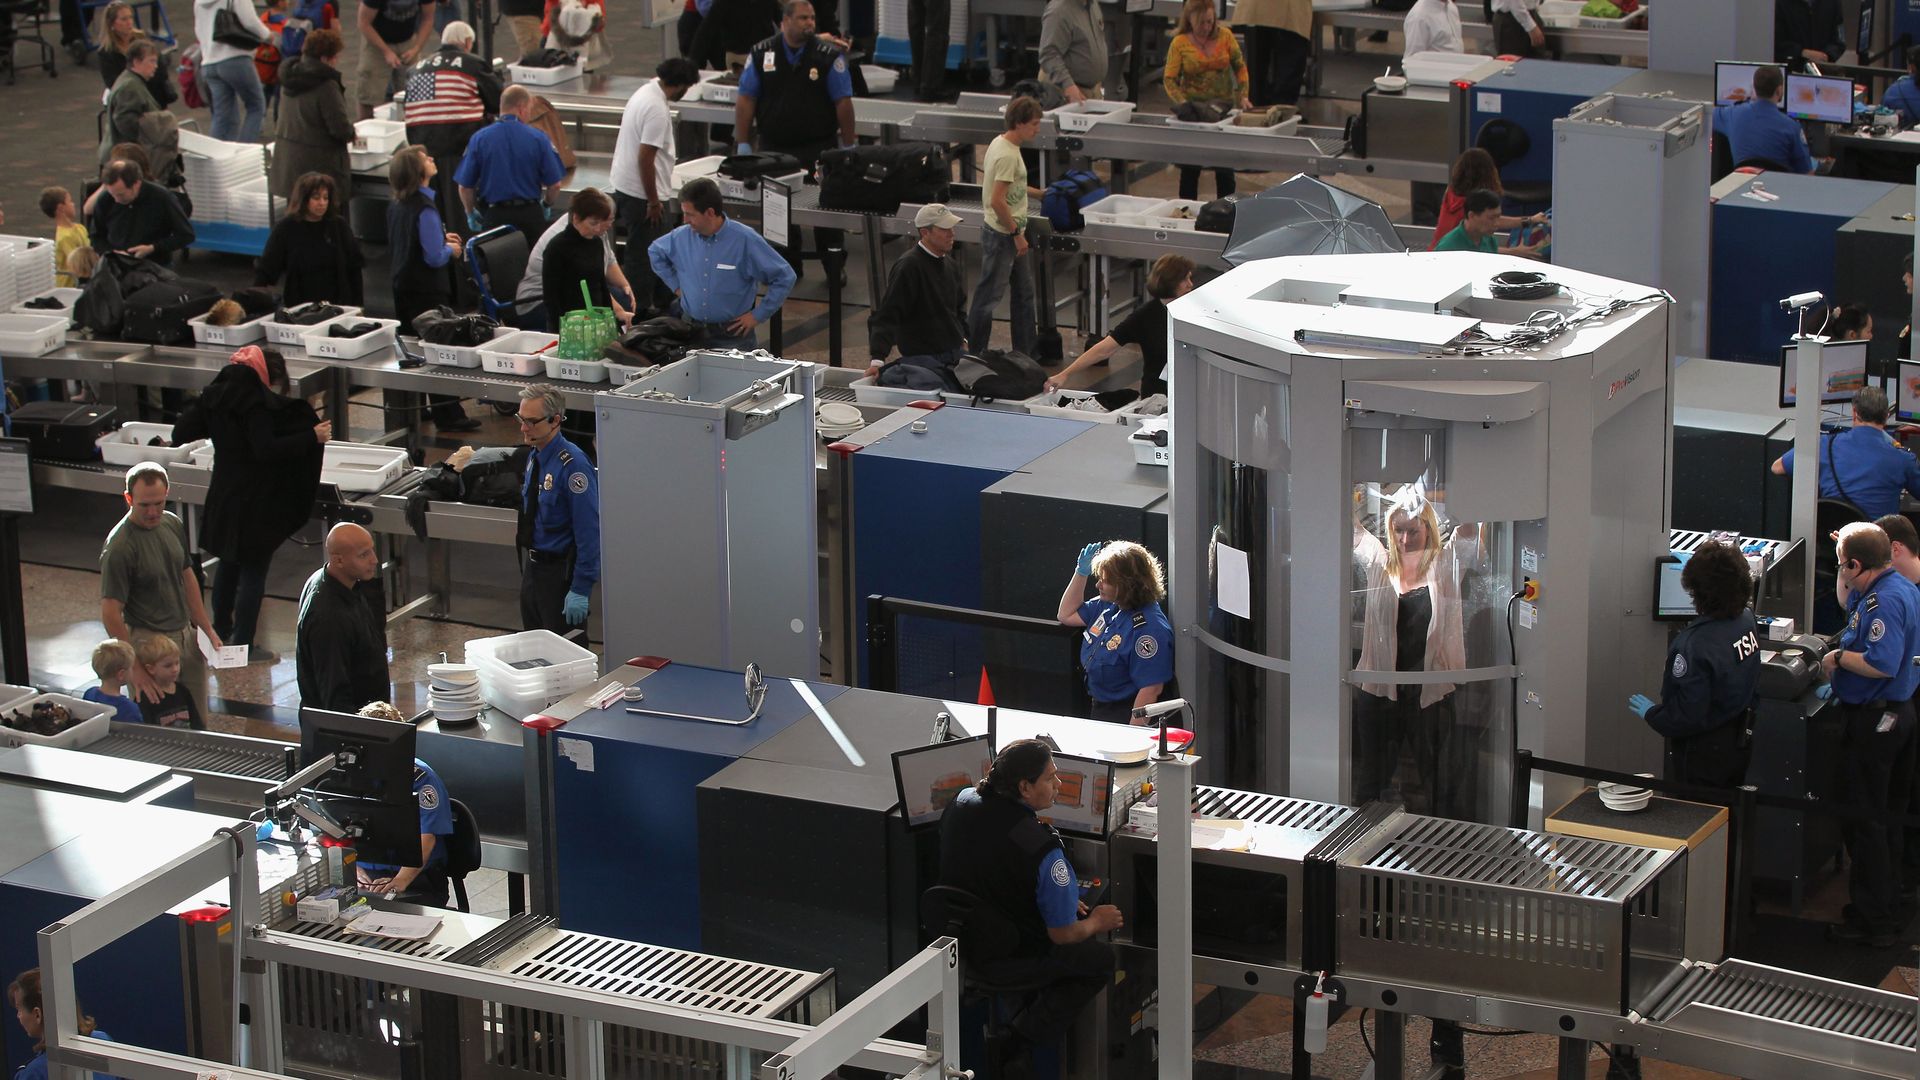 Travelers making their way through the Transportation Security Administration security checkpoint at the Denver International Airport. Photo: John Moore/Getty Images